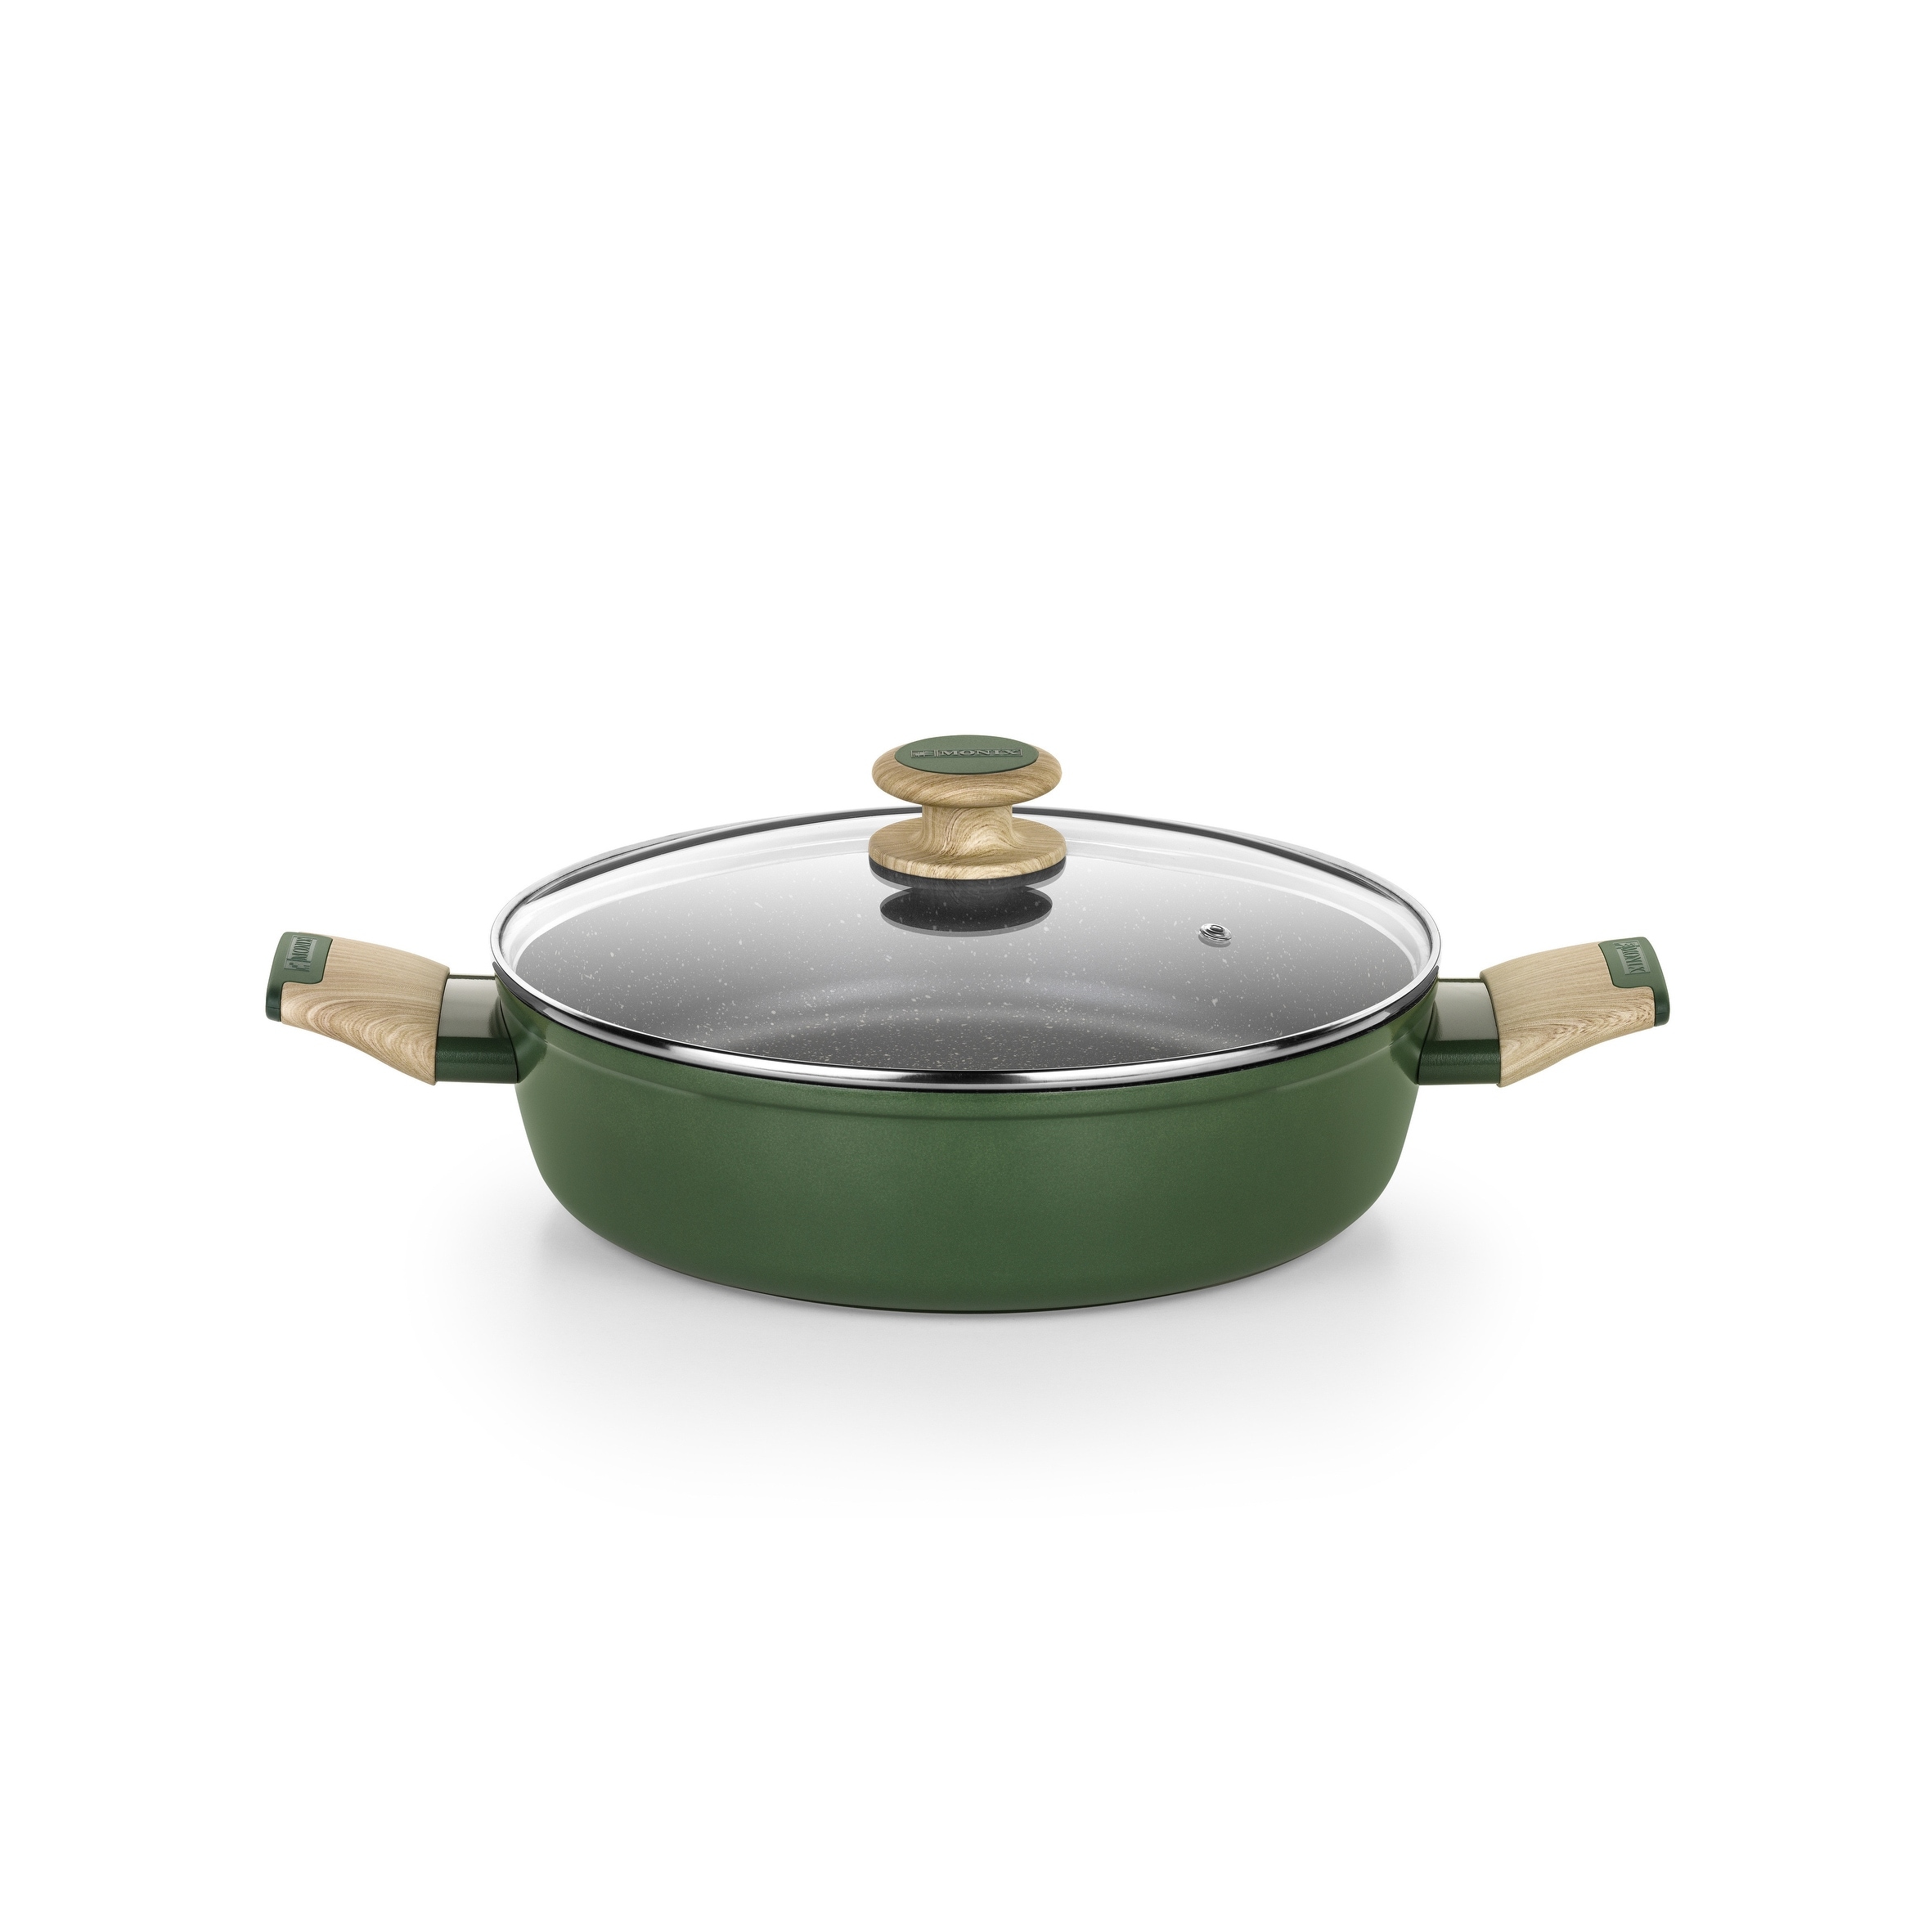 https://ak1.ostkcdn.com/images/products/is/images/direct/4cf2ad84d9f01c9a033278fcc733a3e1dcffd020/Monix-Amazonia-Non-Stick-Low-Casserole.jpg